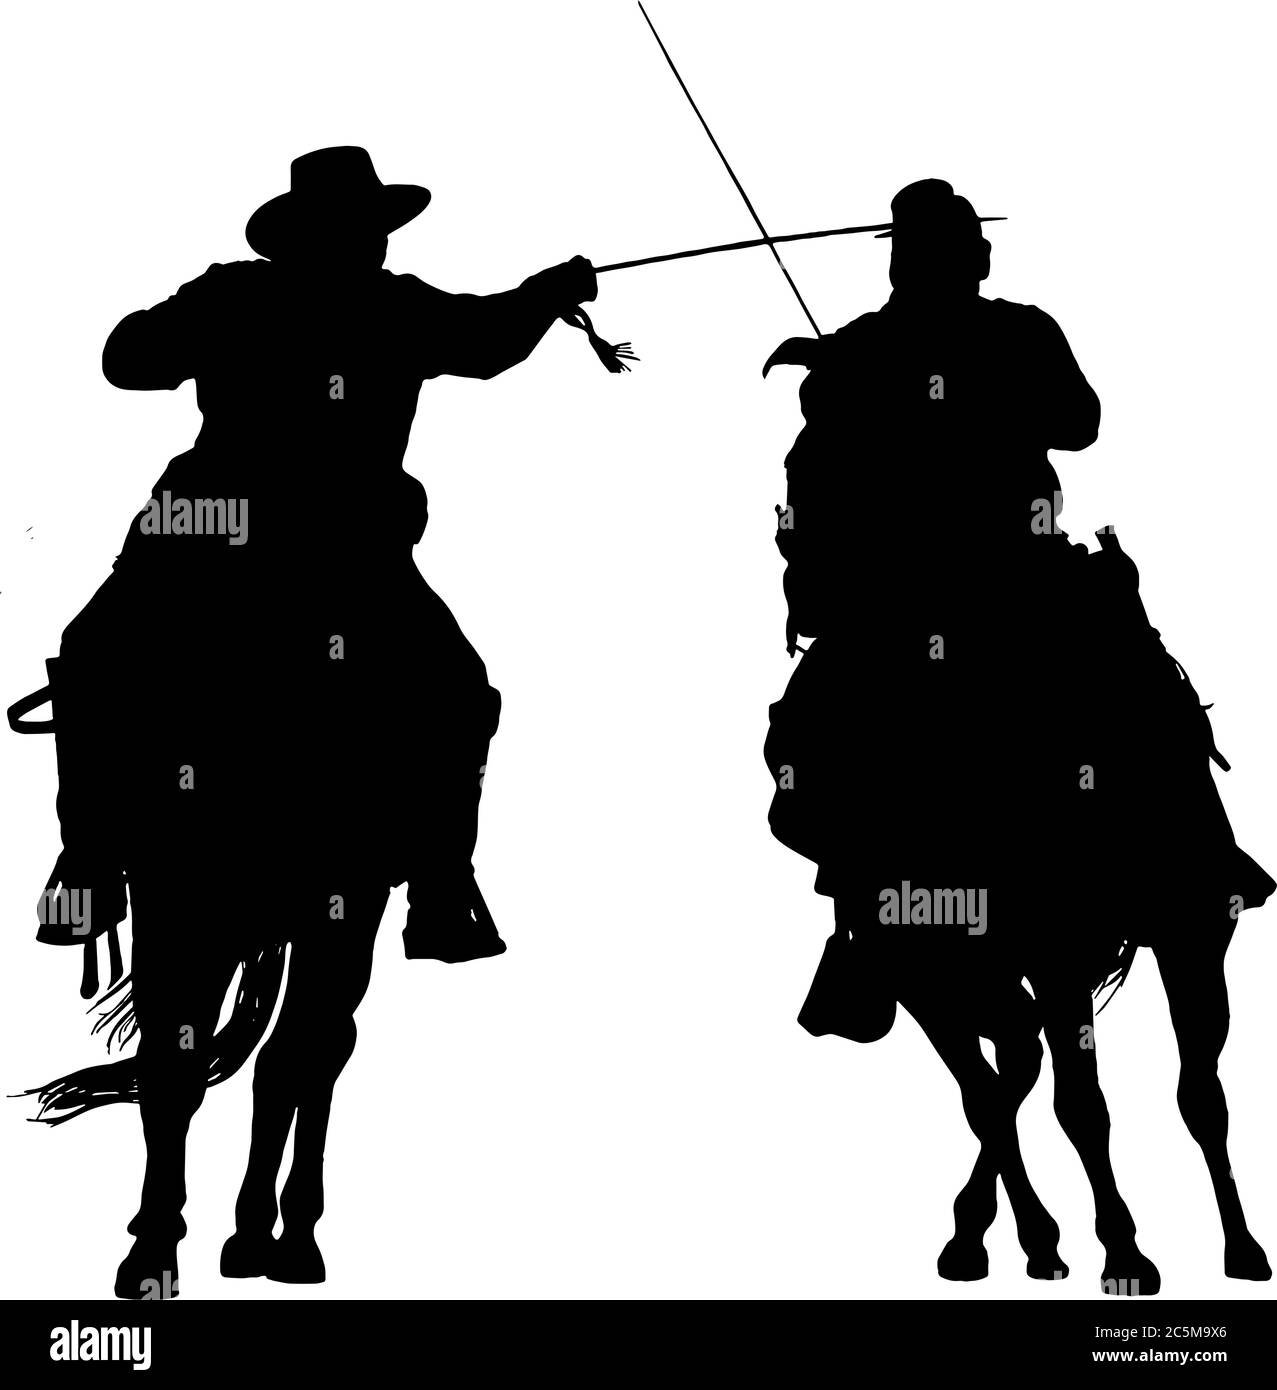 American Civil War soldiers on horseback fighting with swords, silhouettes in black on white background Stock Vector